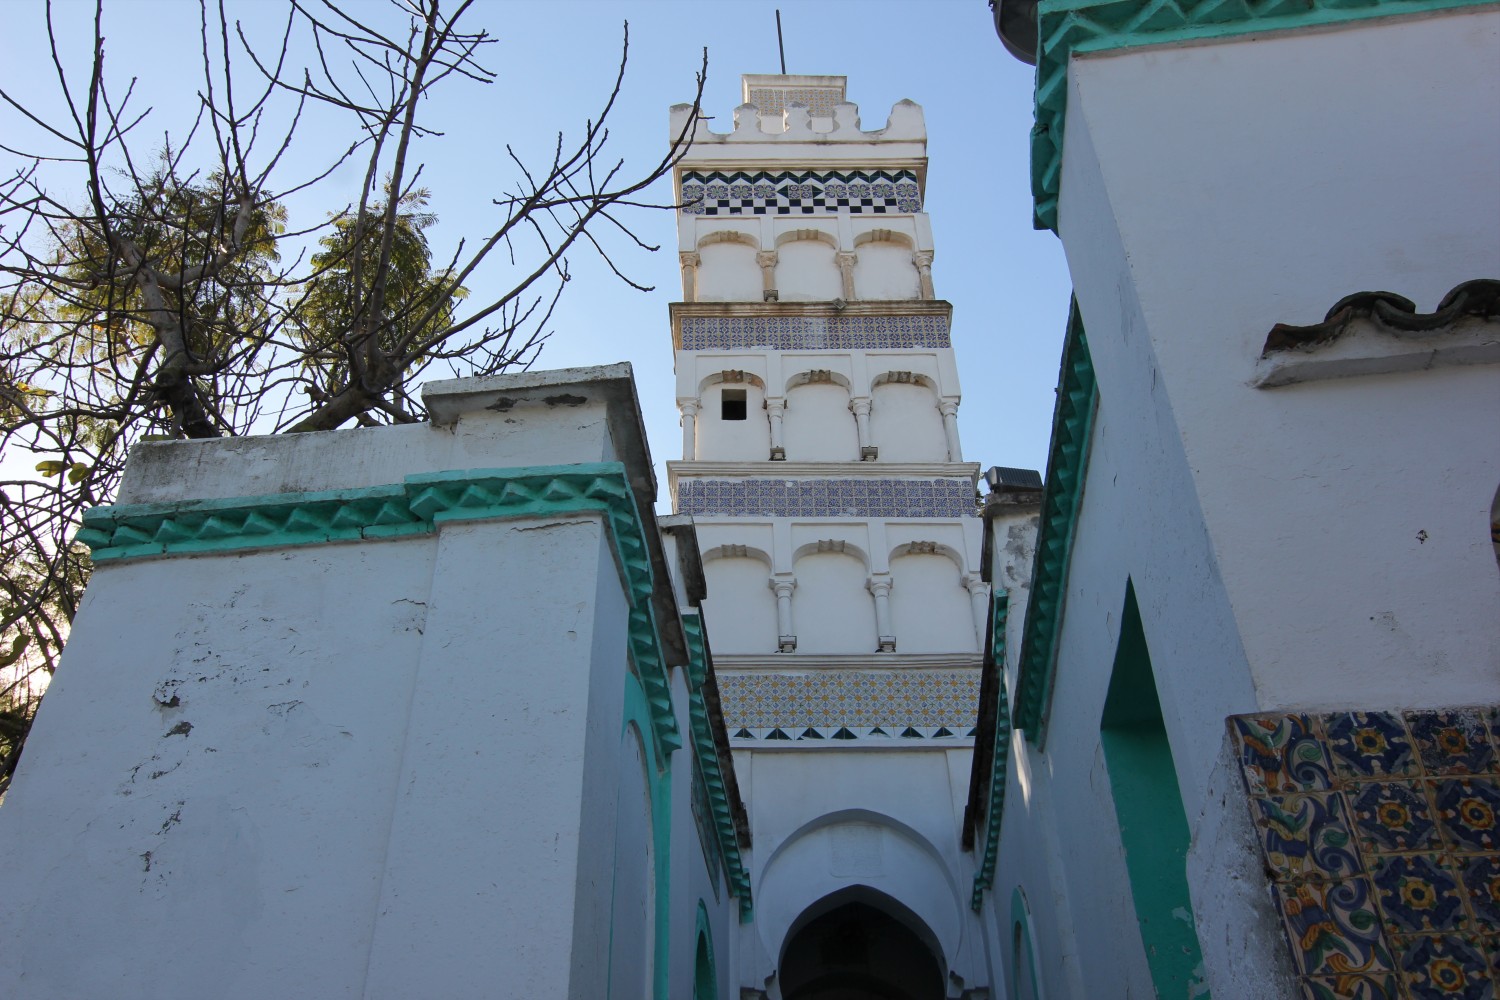 Low-angle view of the minaret showing levels of depressed arches and zellij frieze